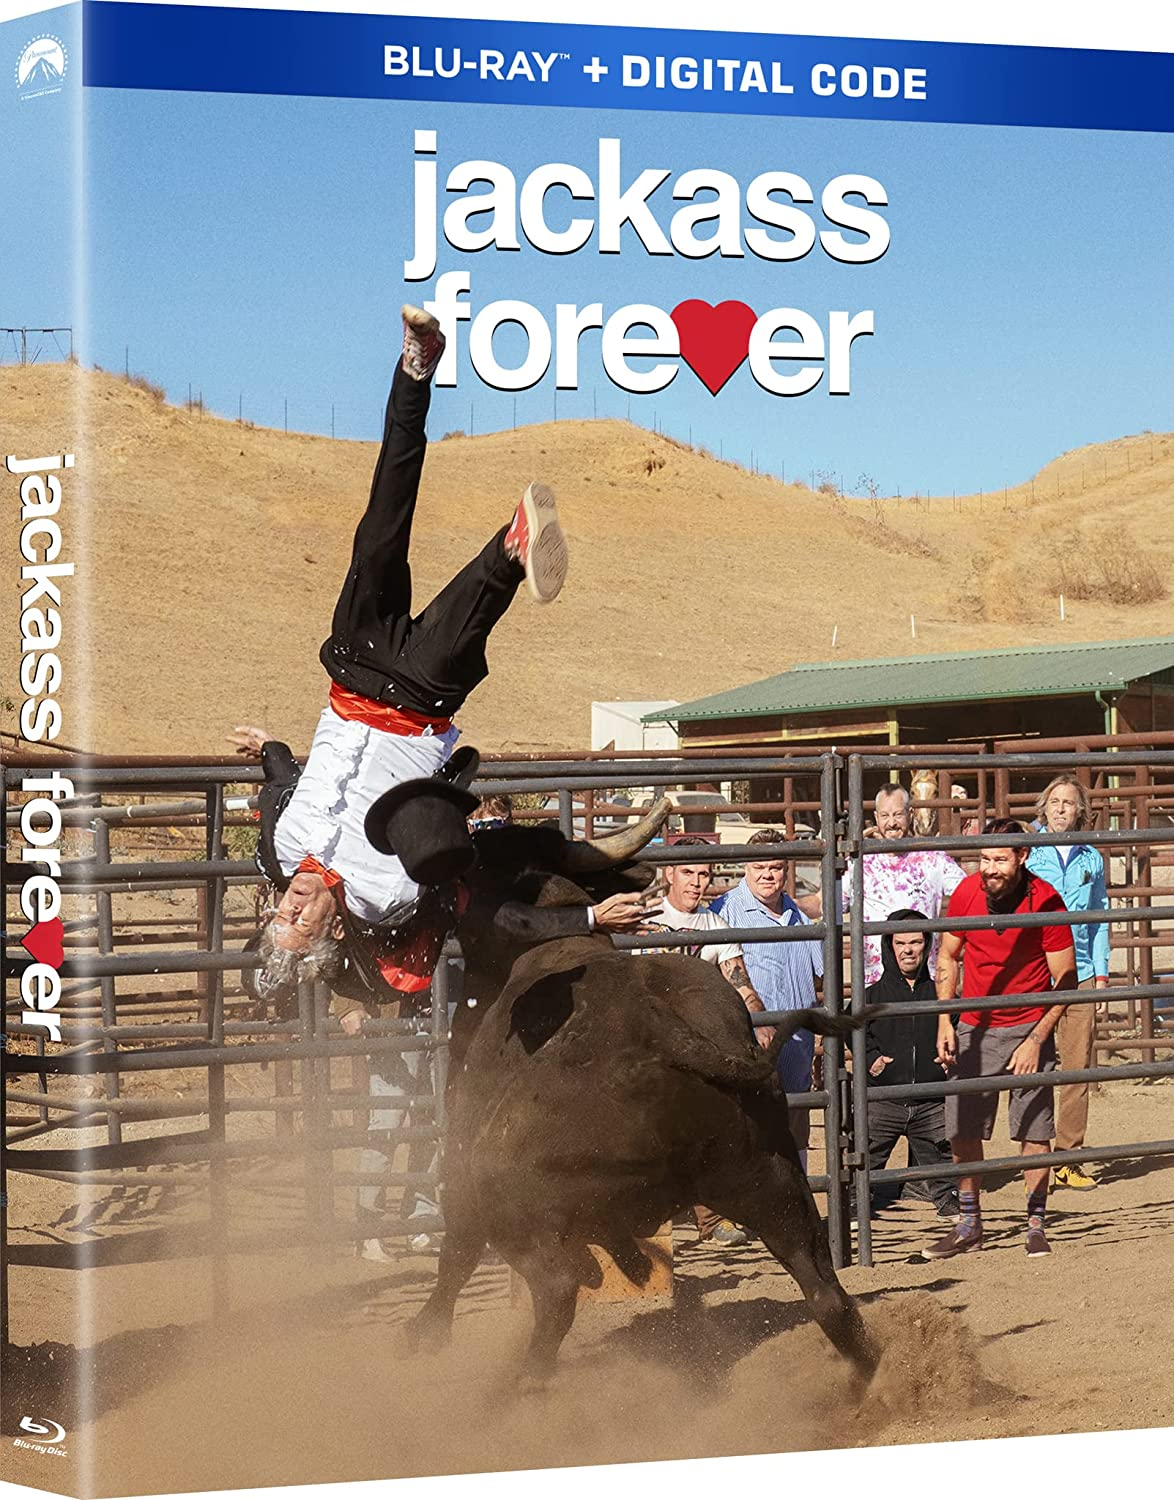 Jackass Forever Bluray Preorder $19.99